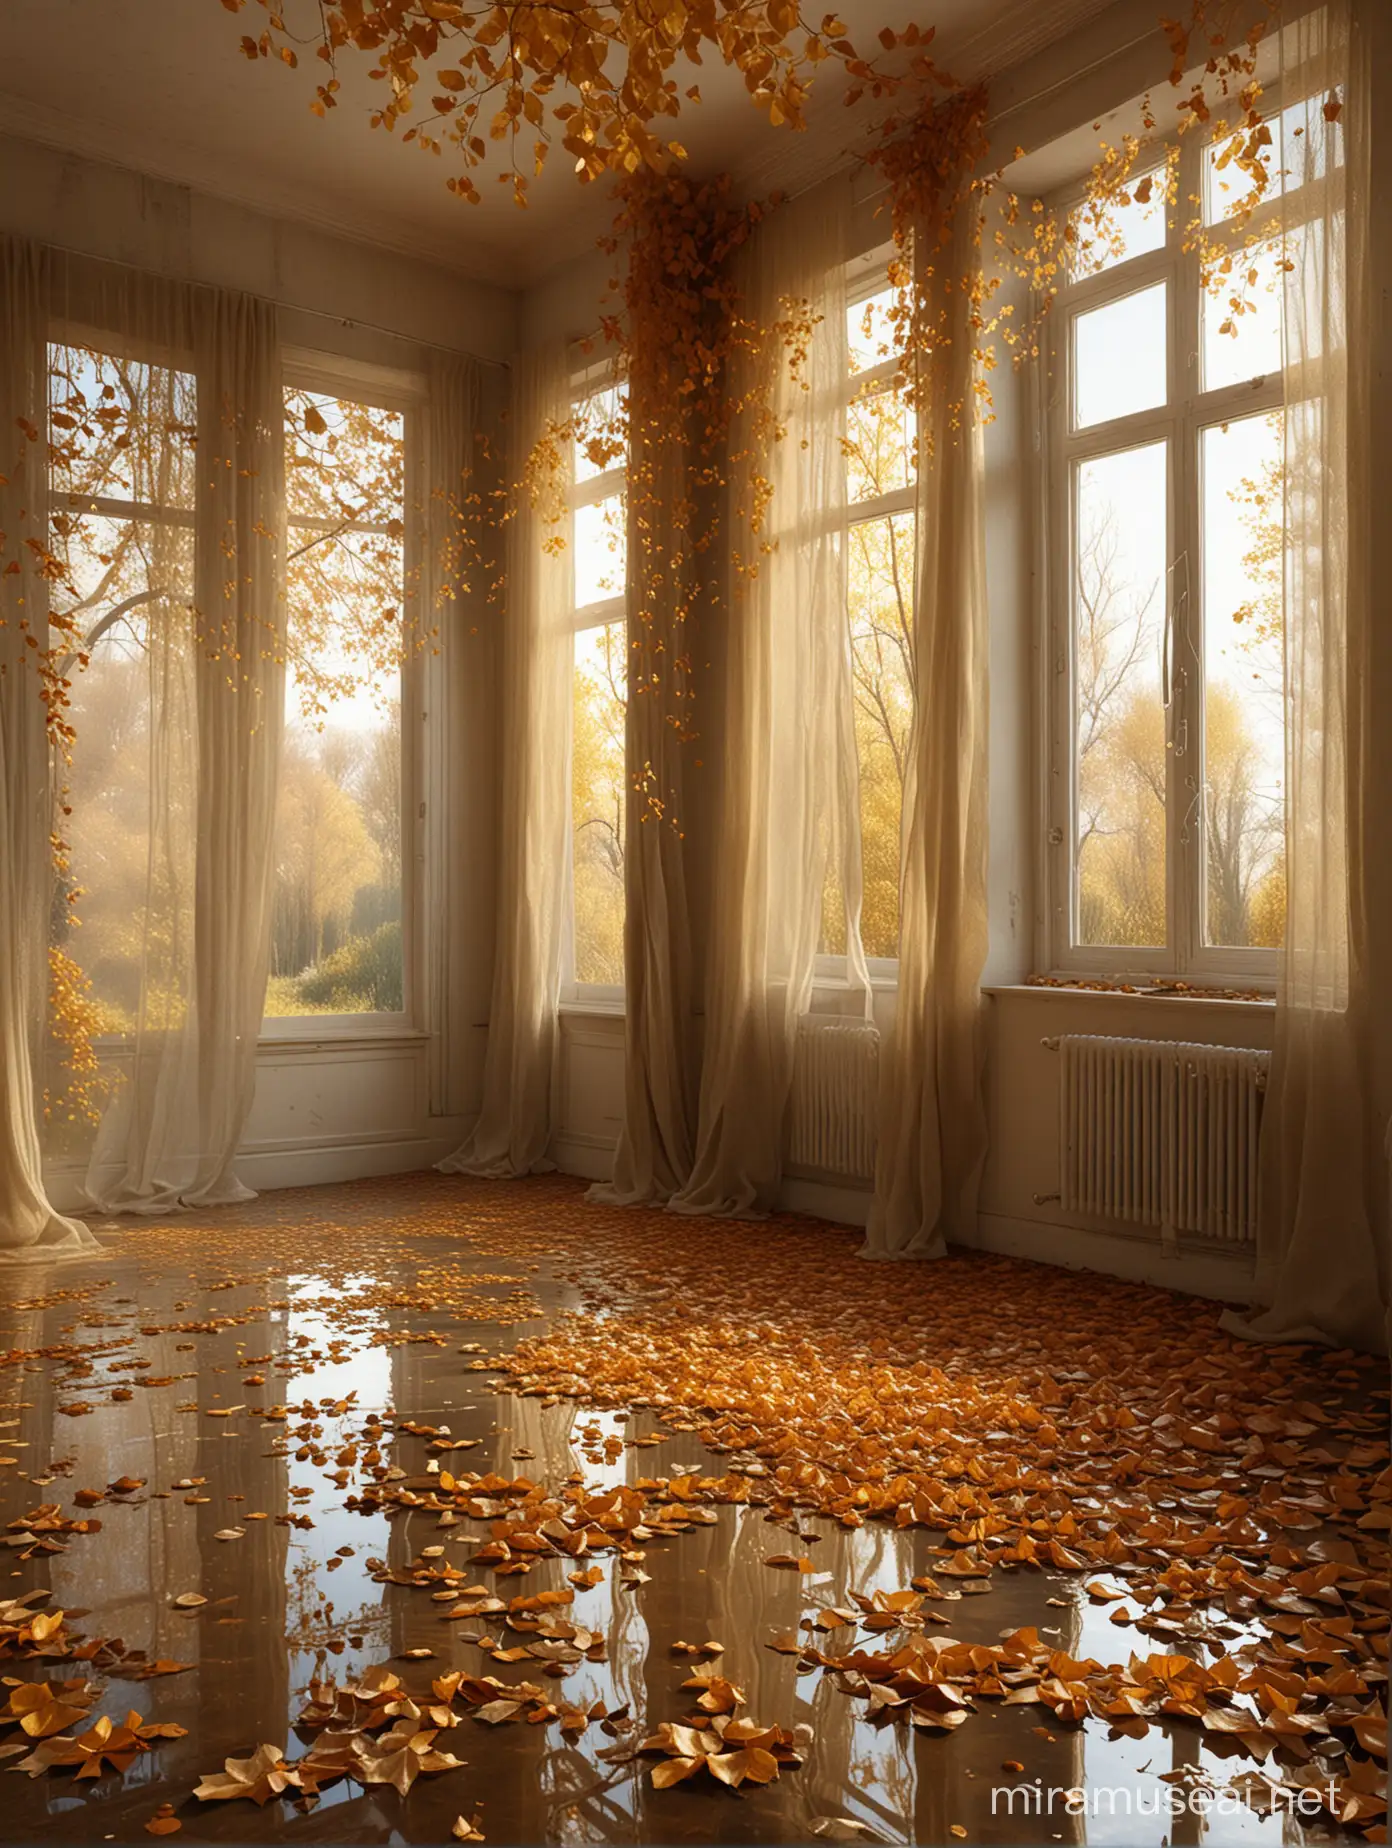 Autumnal Countryside Room with Curtains and Fishing Nets